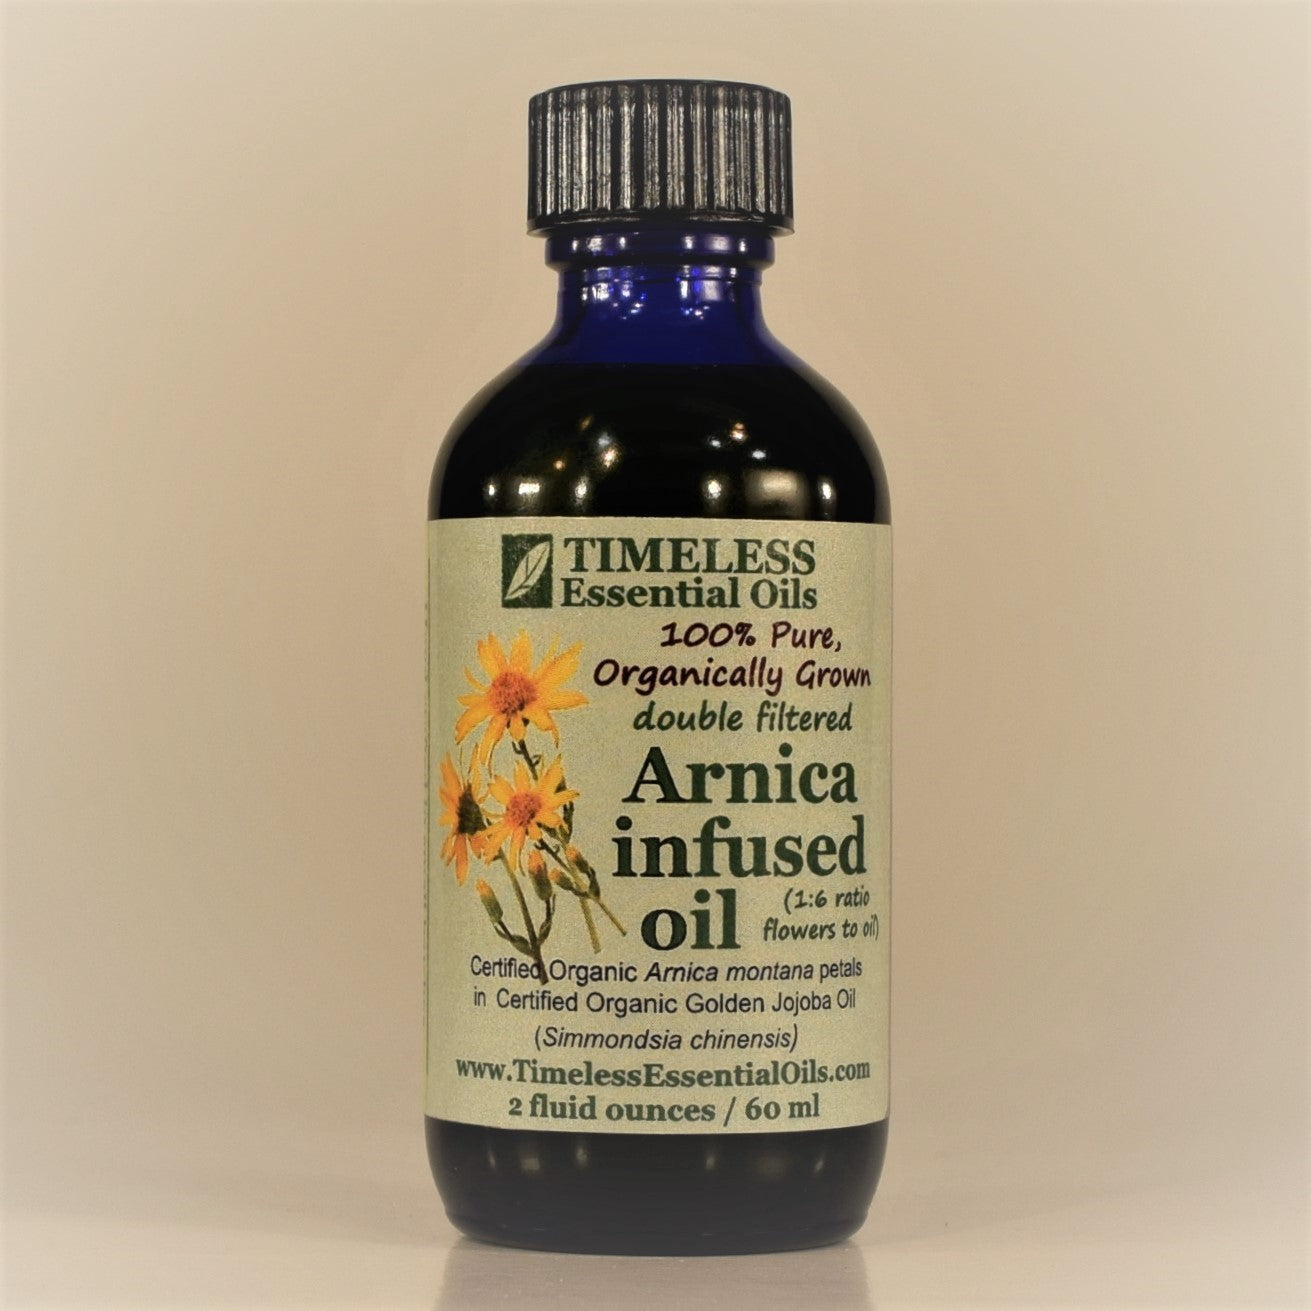 TIMELESS Premium, double filtered Arnica Infused Oil handcrafted in small batches with Certified Organic Arnica montana flowers and Certified Organic Golden Jojoba Oil.